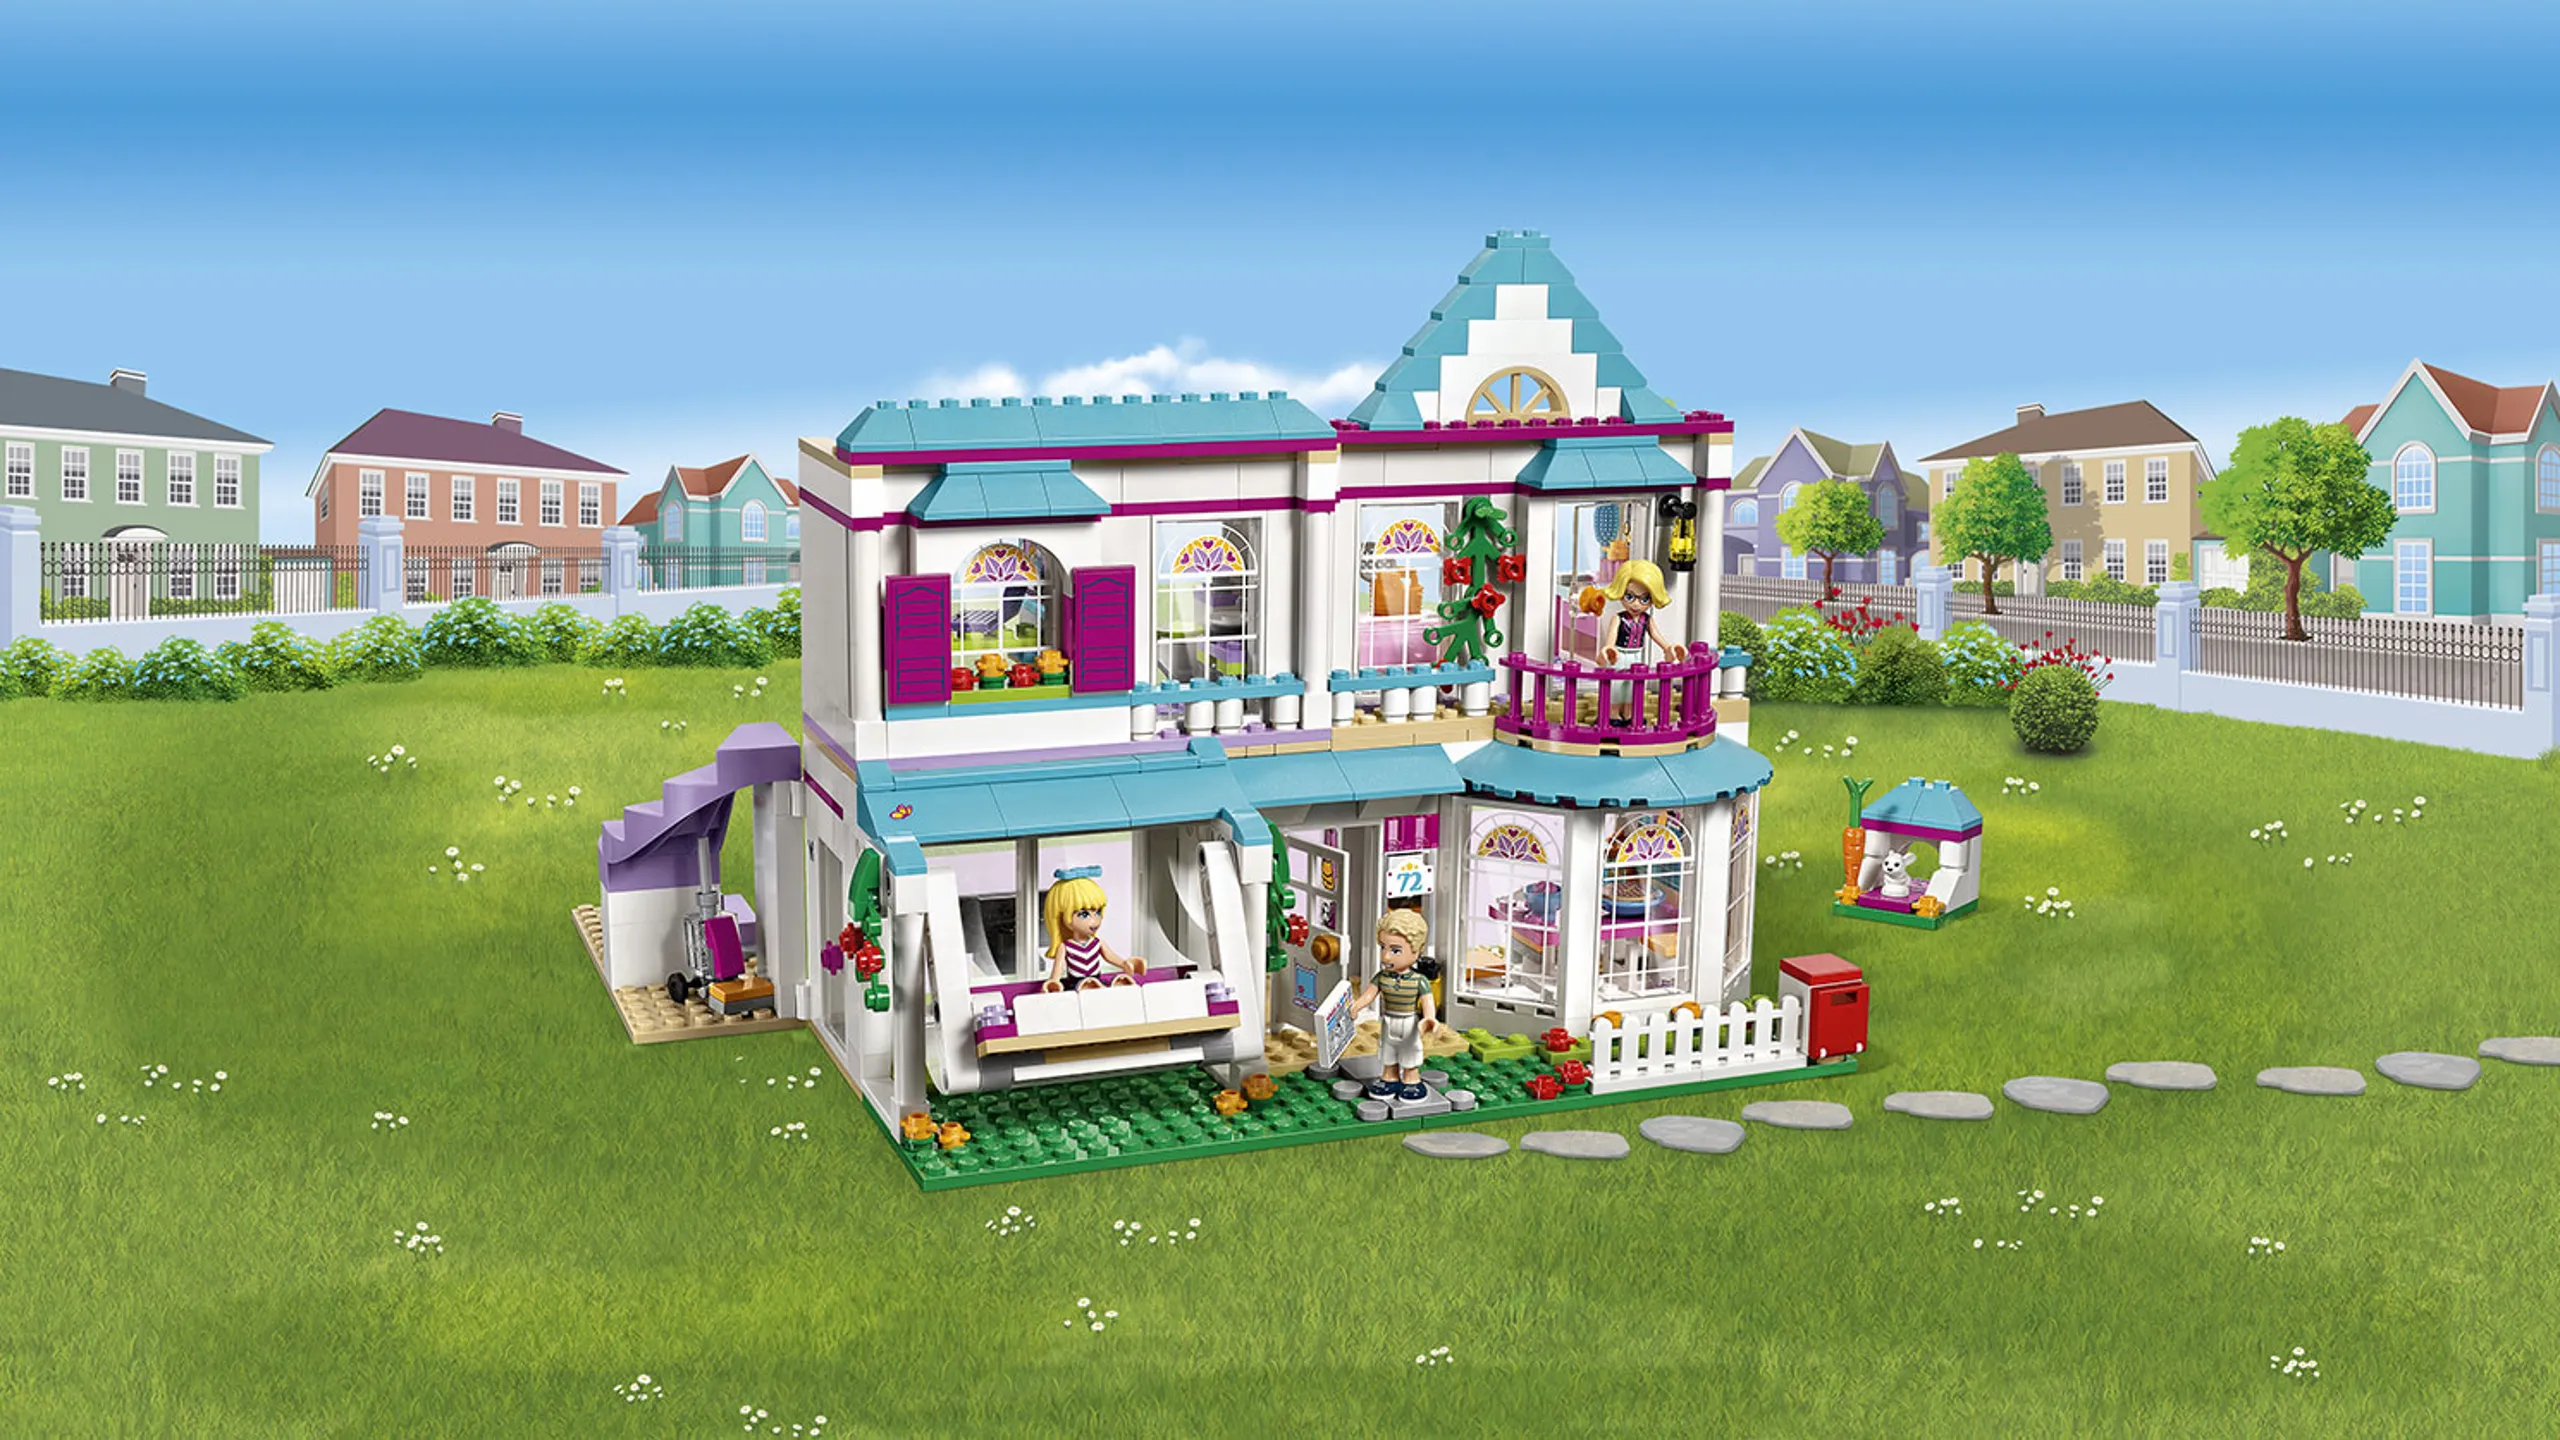 LEGO Friends - 41314 Stephanie's House - Stephanie swings in the swing chair on the porch while dad James has fetched the newspaper from the mailbox and mom Alicia is standing on the balcony of this detailed house.